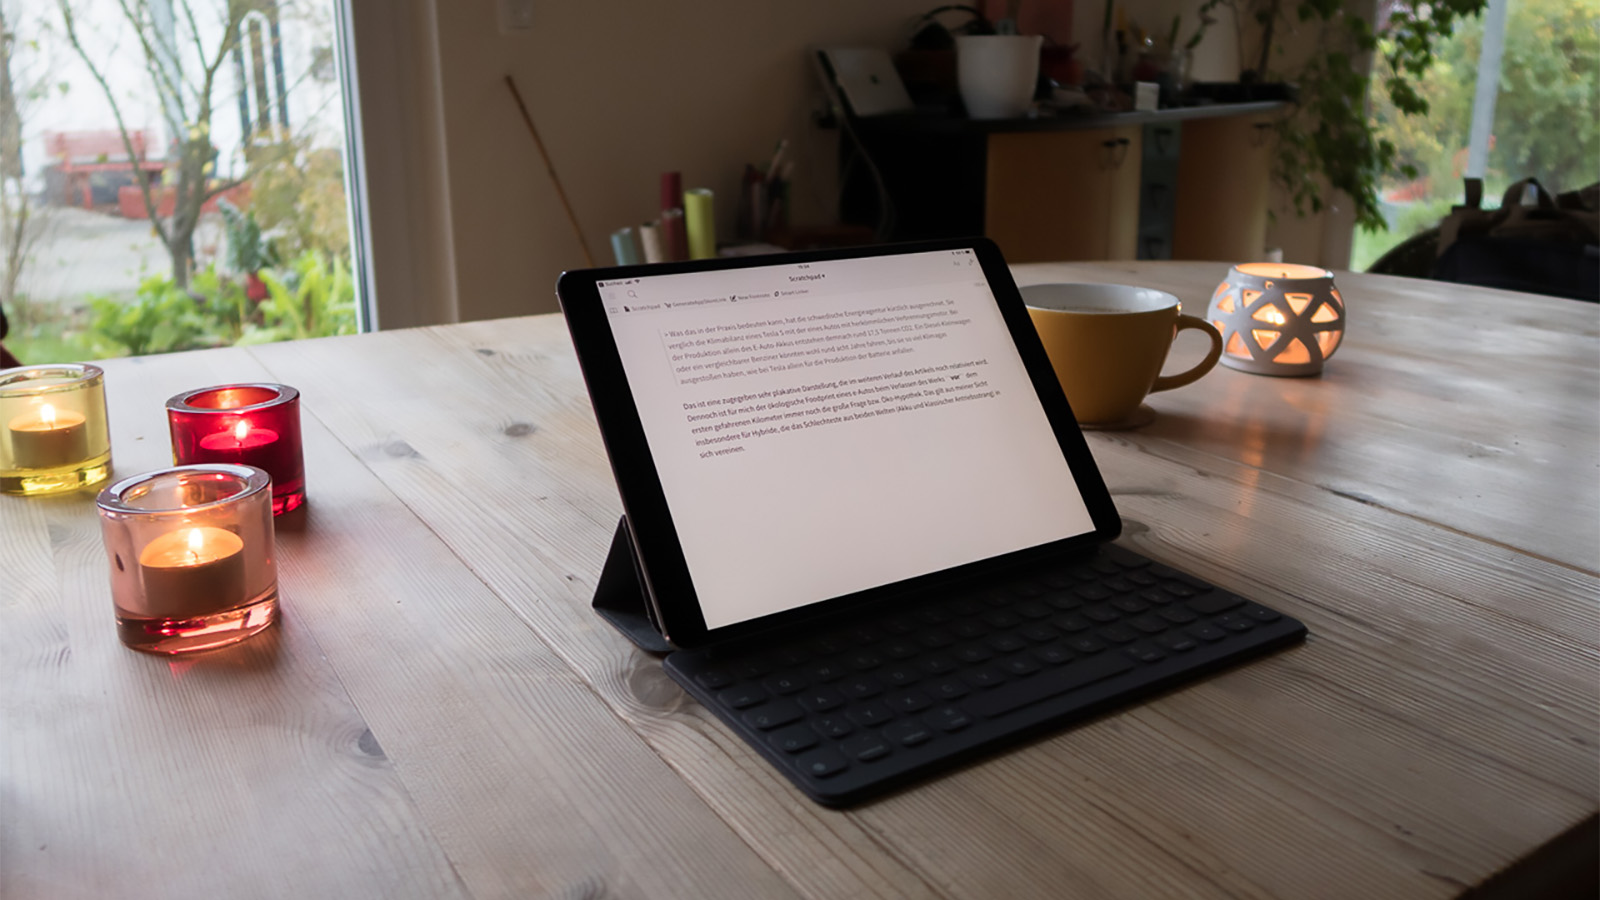 iPad on table with Smart Keyboard connected